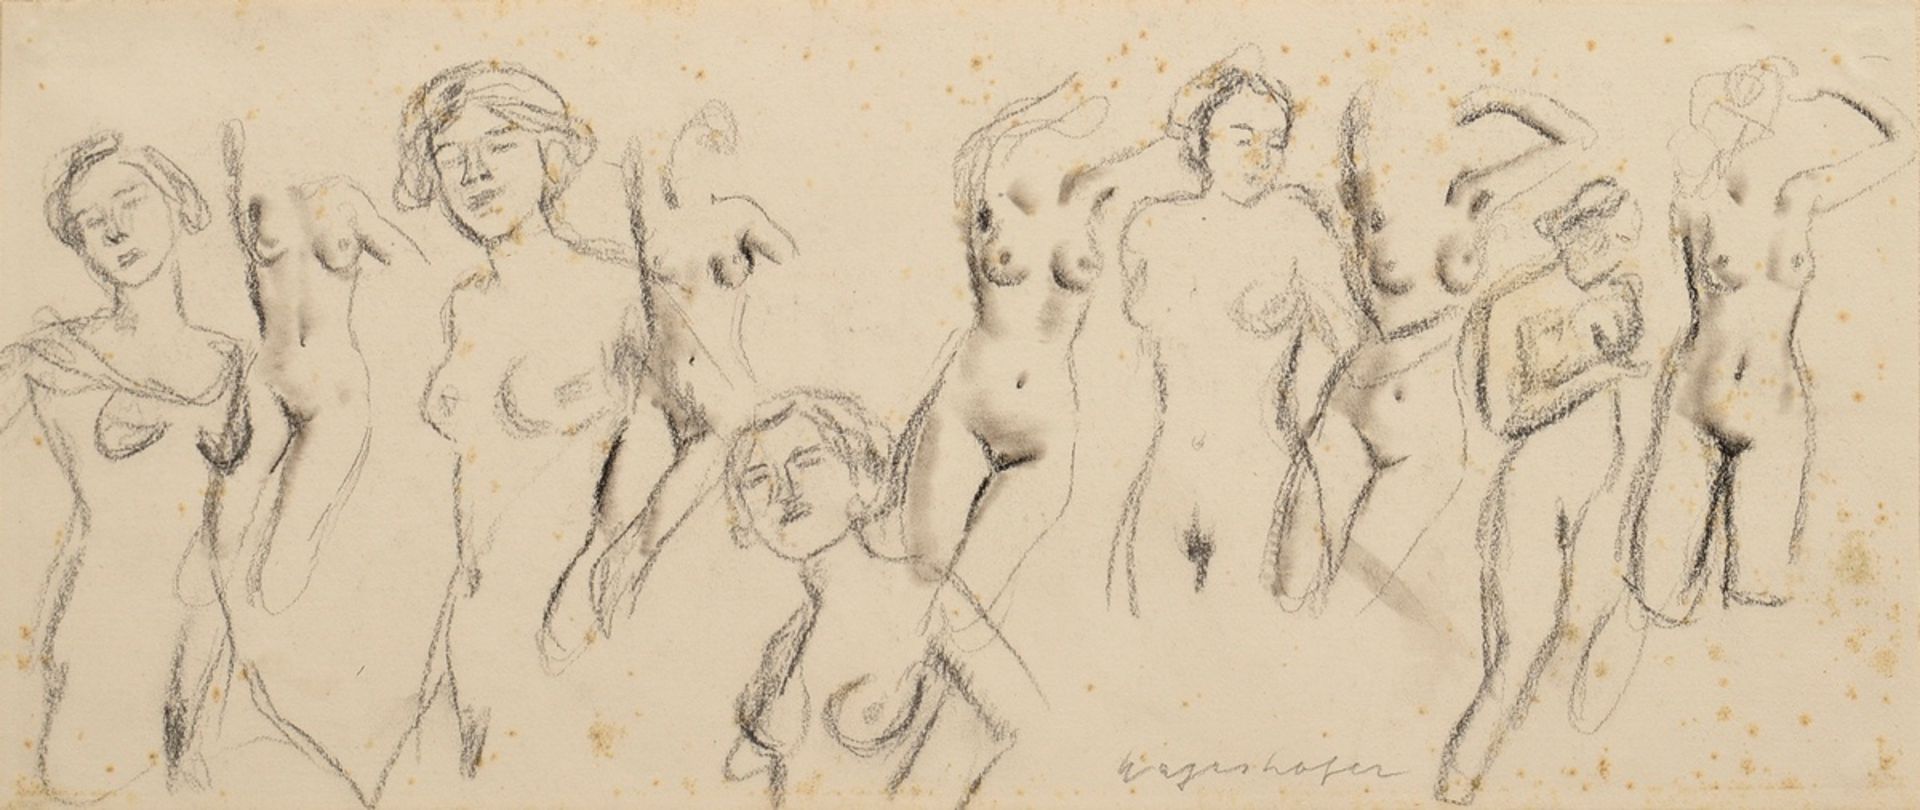 17 Mayershofer, Max (1875-1950) "Female nude drawings", charcoal, each sign., each mounted in passe - Image 13 of 19